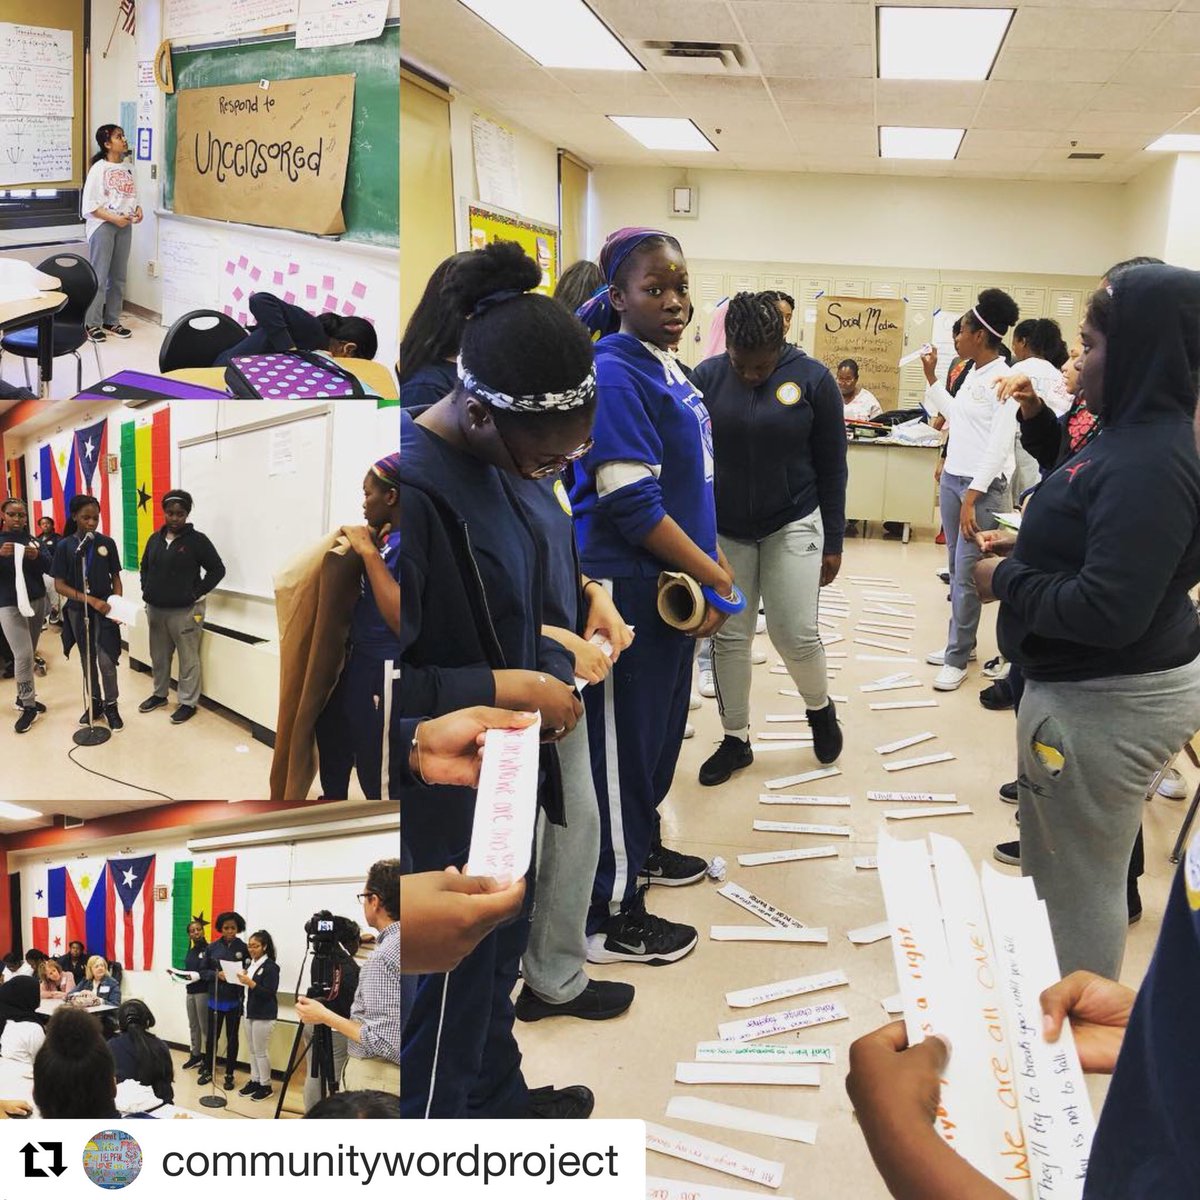 Today our amazingly talented 9th graders at #TYWLSQueens mentored the 7th graders in creating impactful art, building a brave space, and how to make the world a better place through community. We’re so proud of them. #citizenbook #citizenuncensored #cwpnyc @makeitktrainey